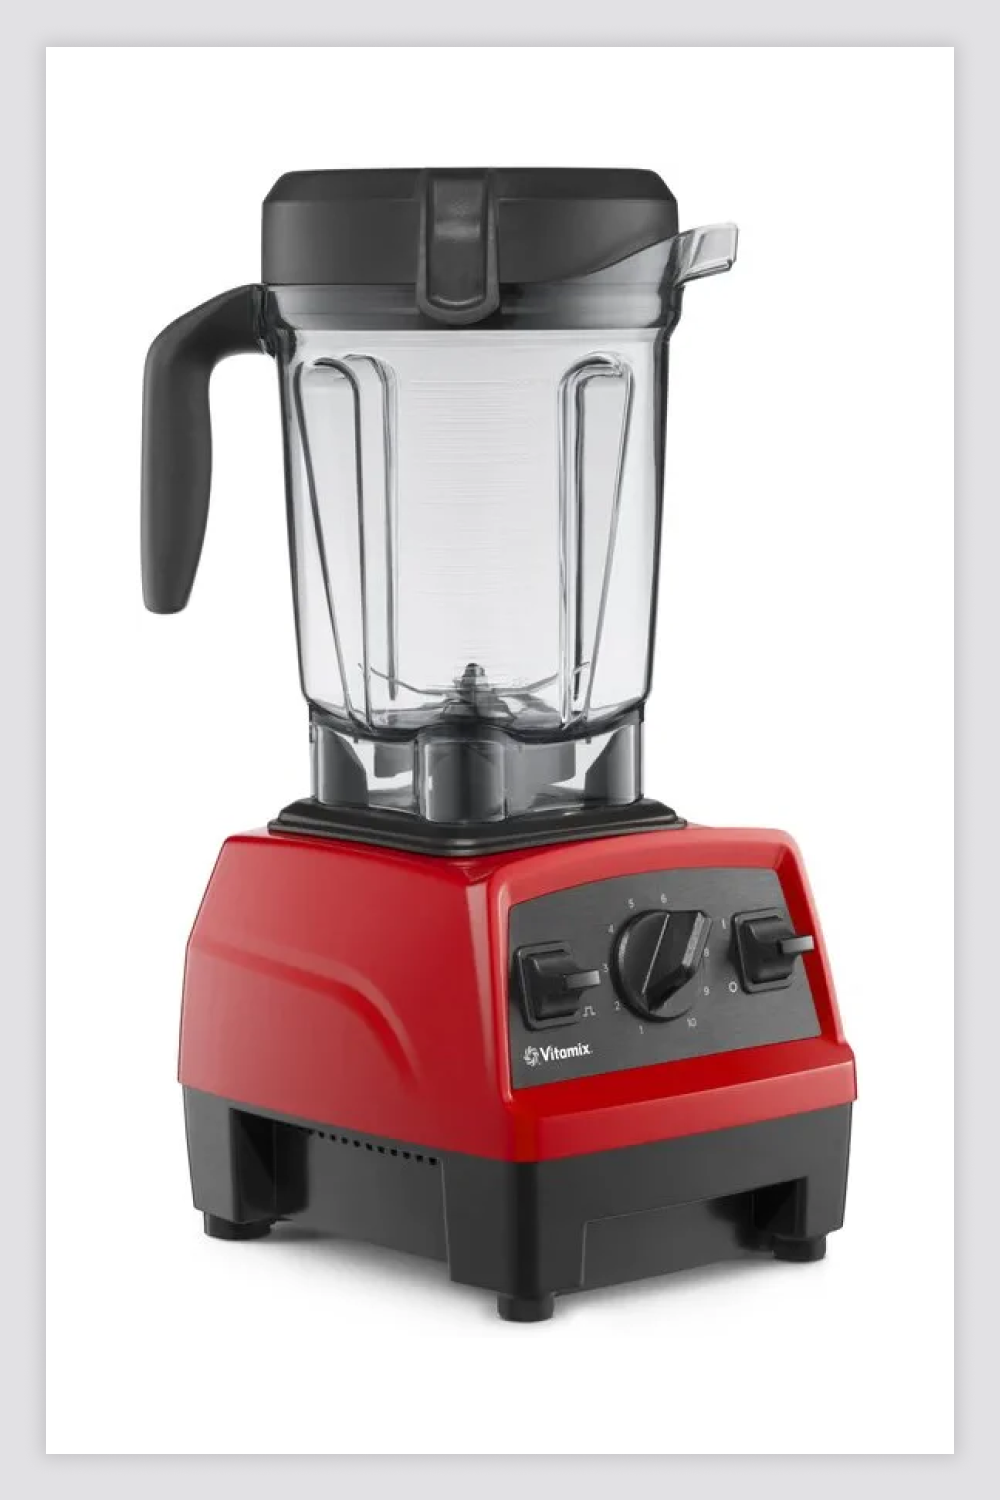 Vitamix Explorian Blender with red base and black top.